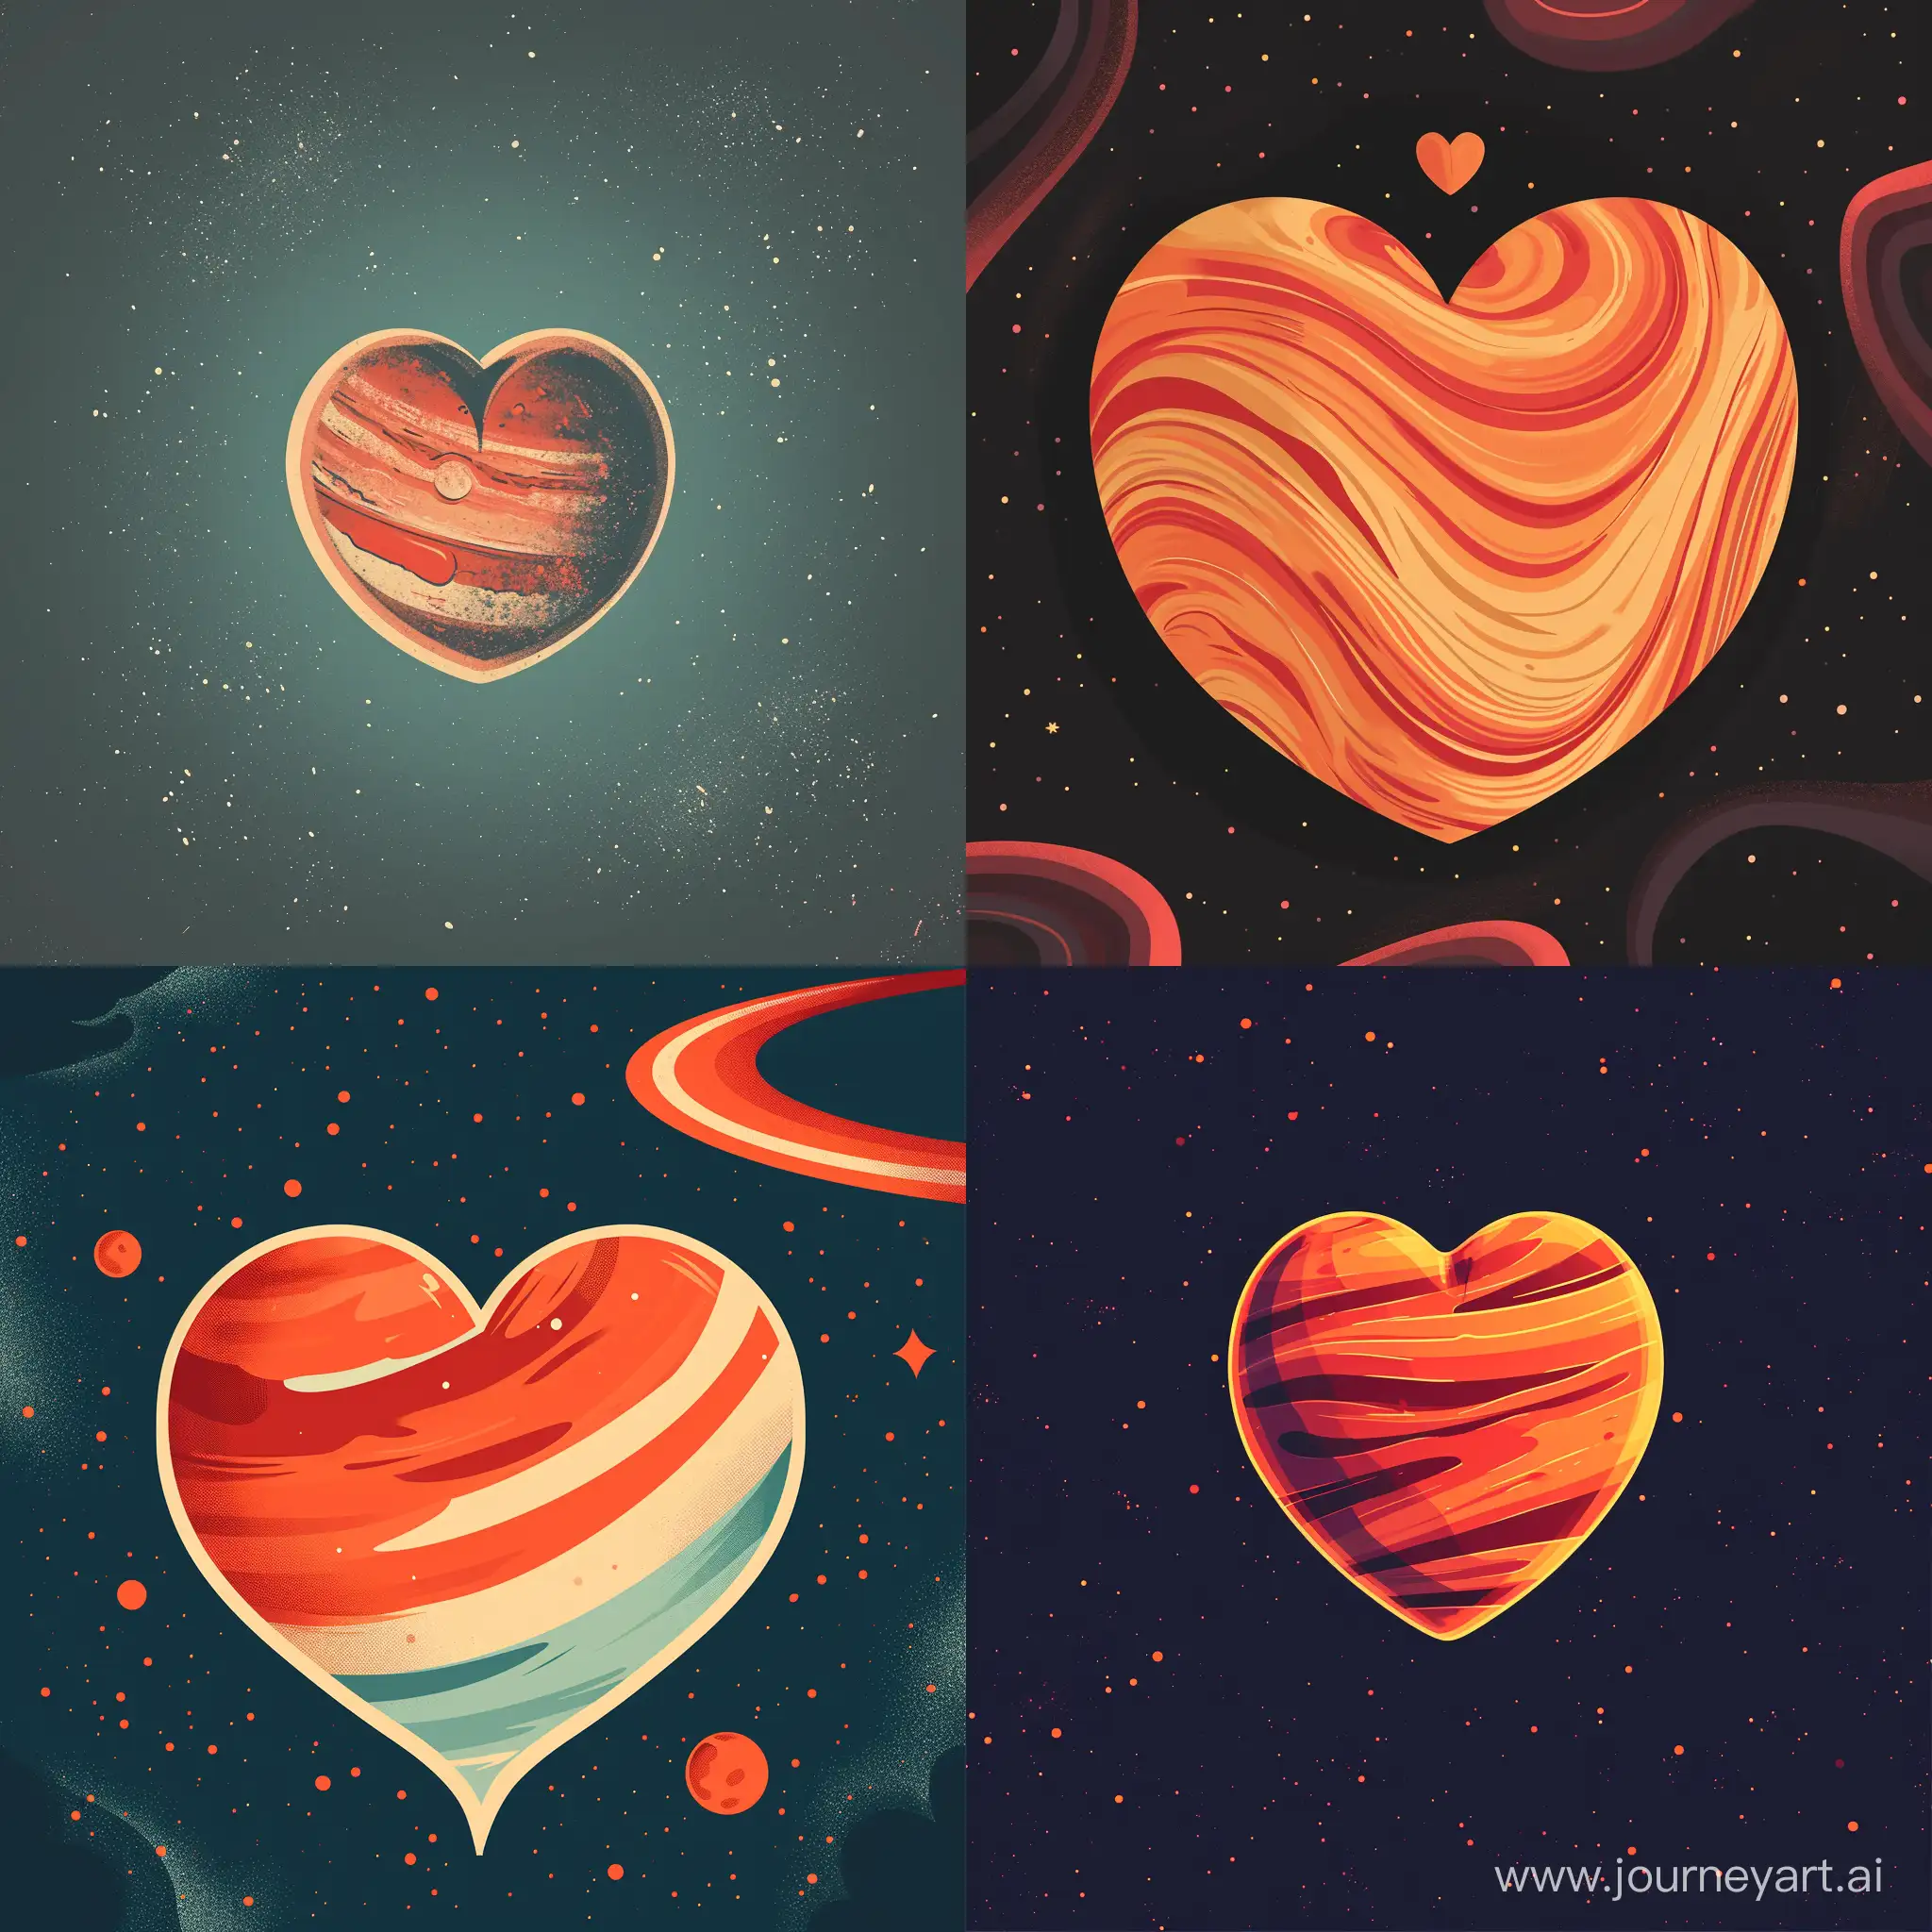 Heartshaped-Planet-Illustration-in-Flat-Design-Style-with-Typography